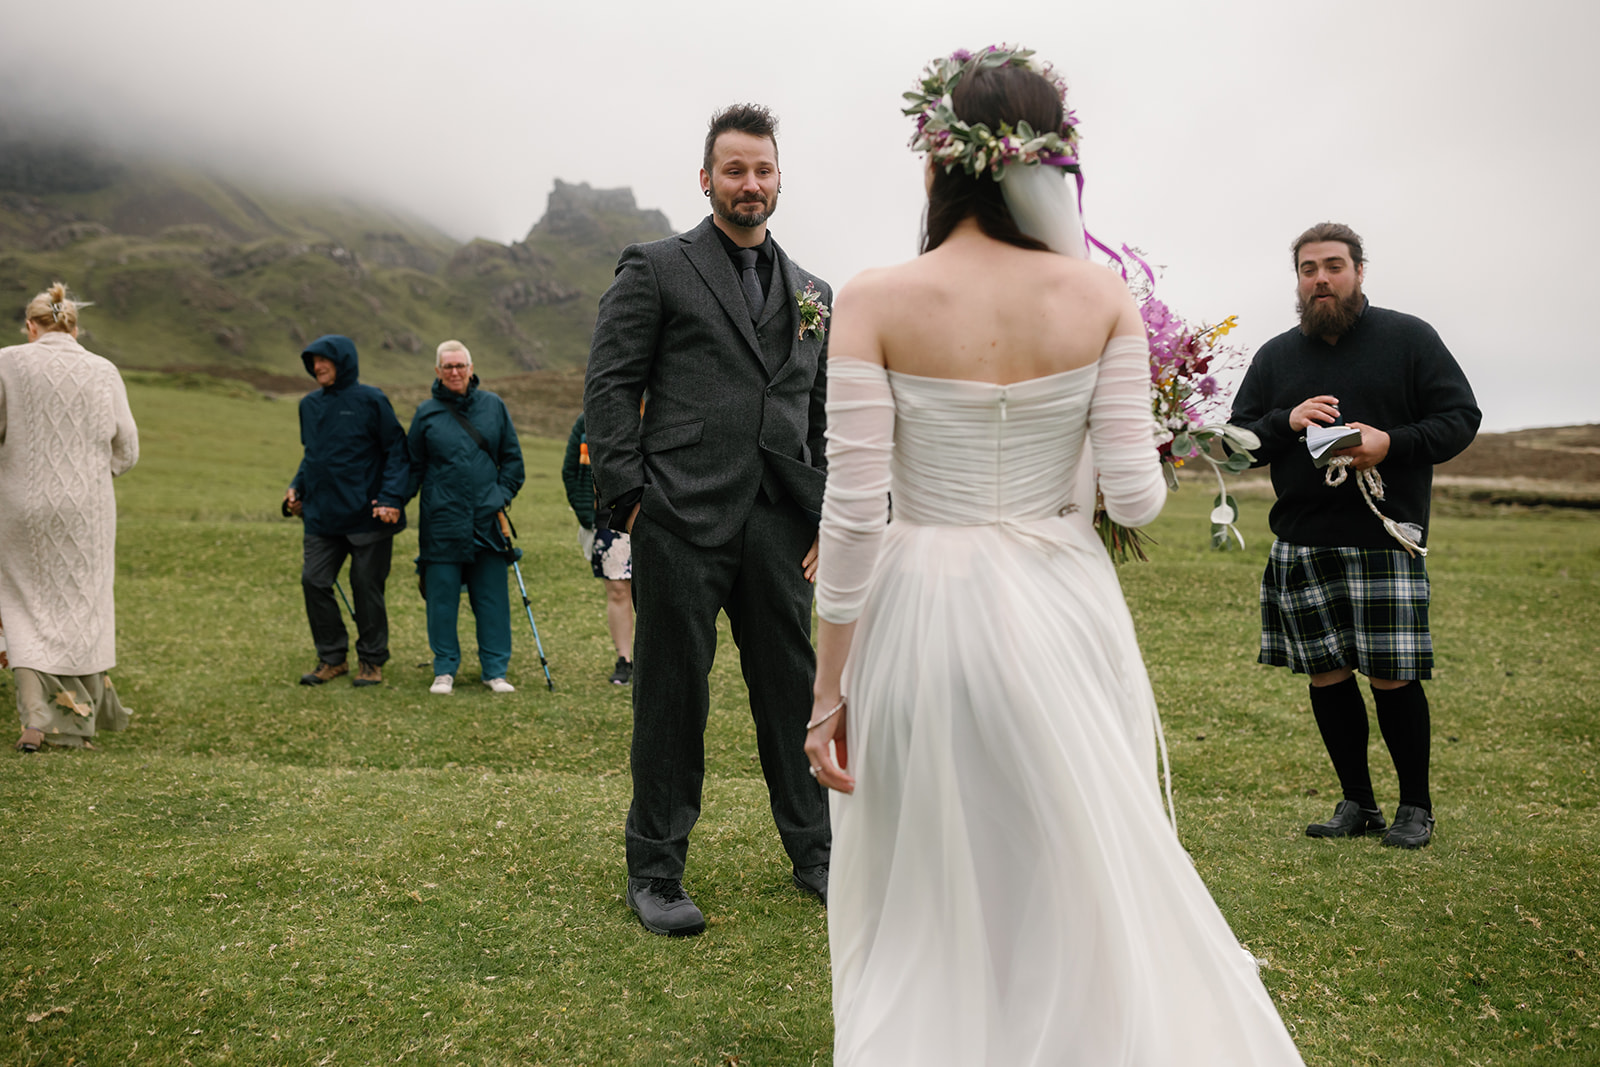 Nick's face lights up as he lays eyes on Becca for the first time in her gown during their Isle of Skye elopement 